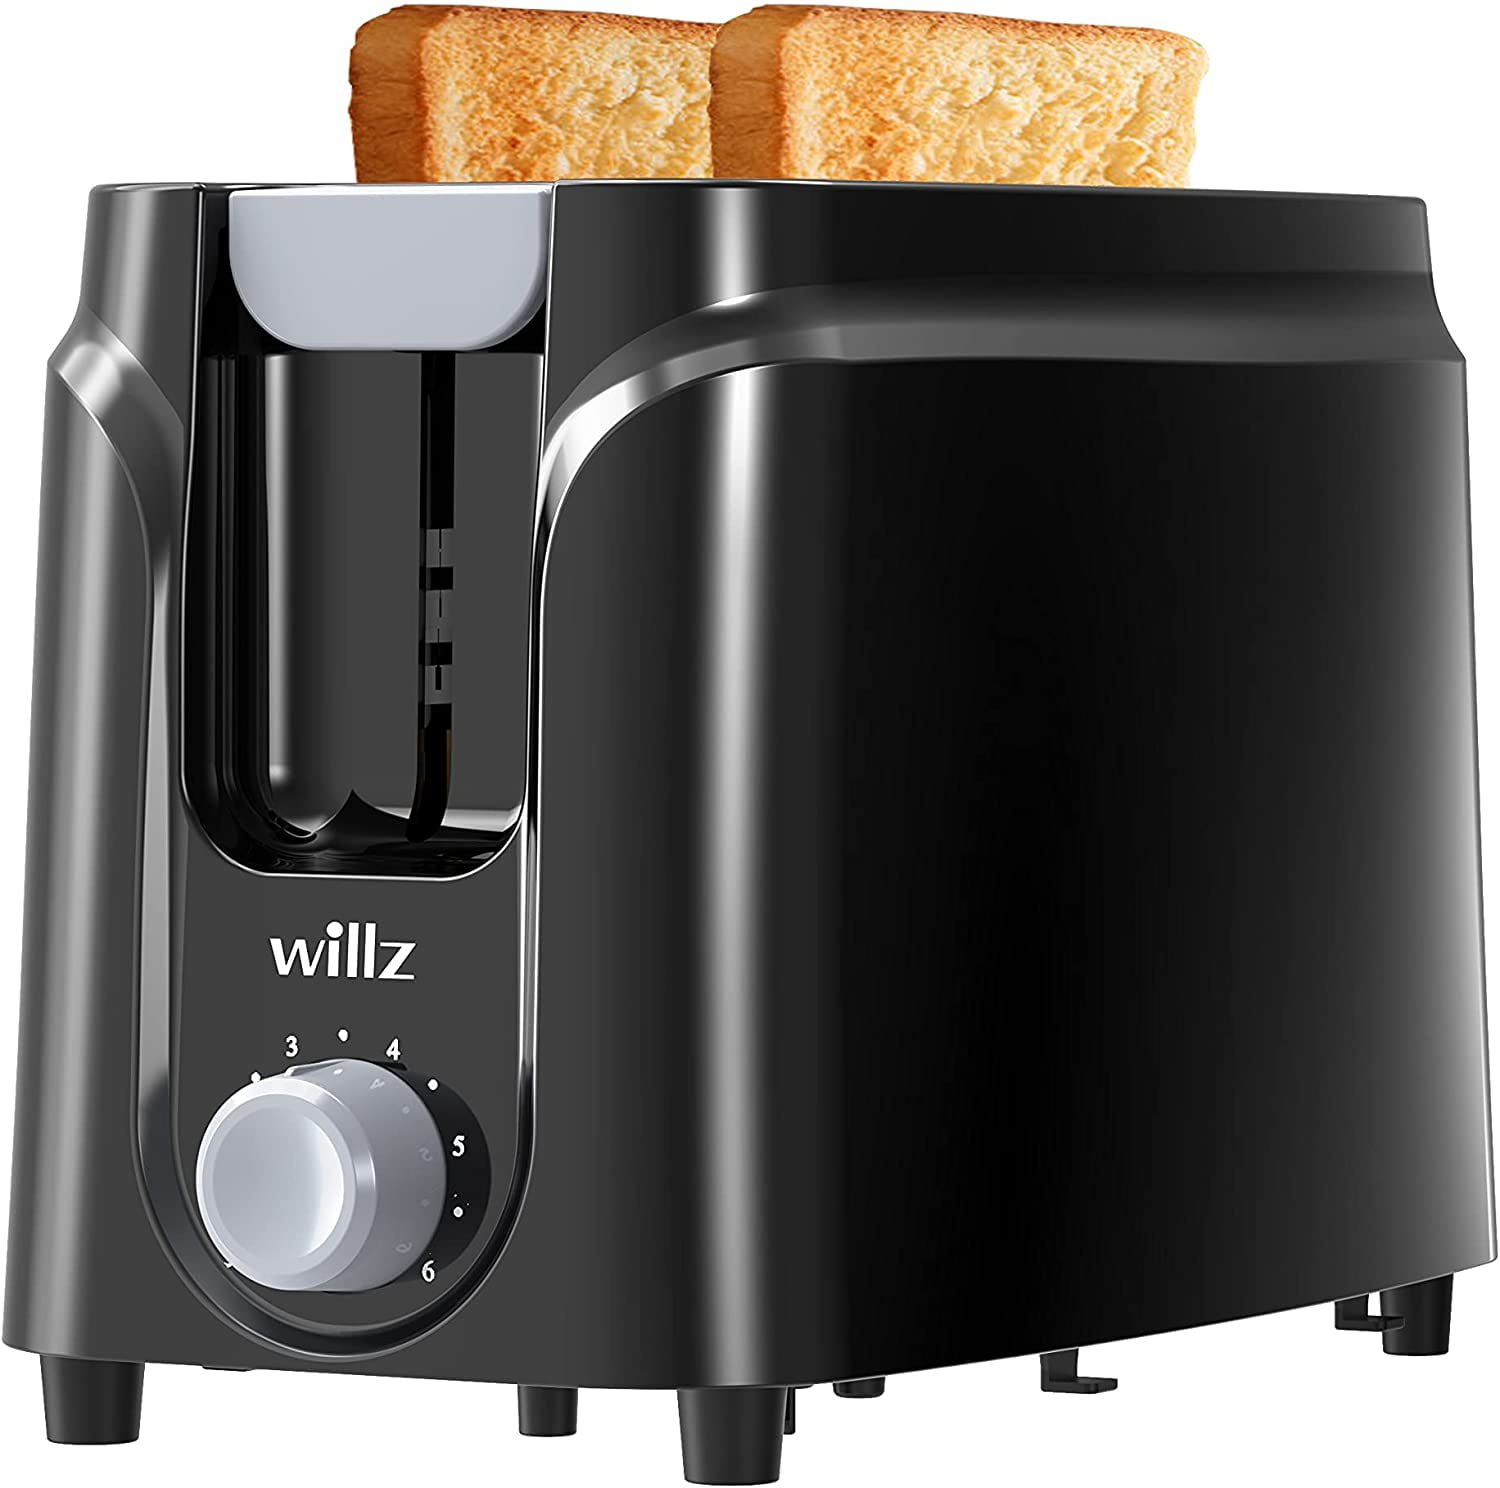 Willz 2-Slice Toaster, Extra Wide Slot with 6 Browning Levels, Small Toaster  for Bread, Removable Crumb Tray, Auto Shut-off & Easy Clean, Black 